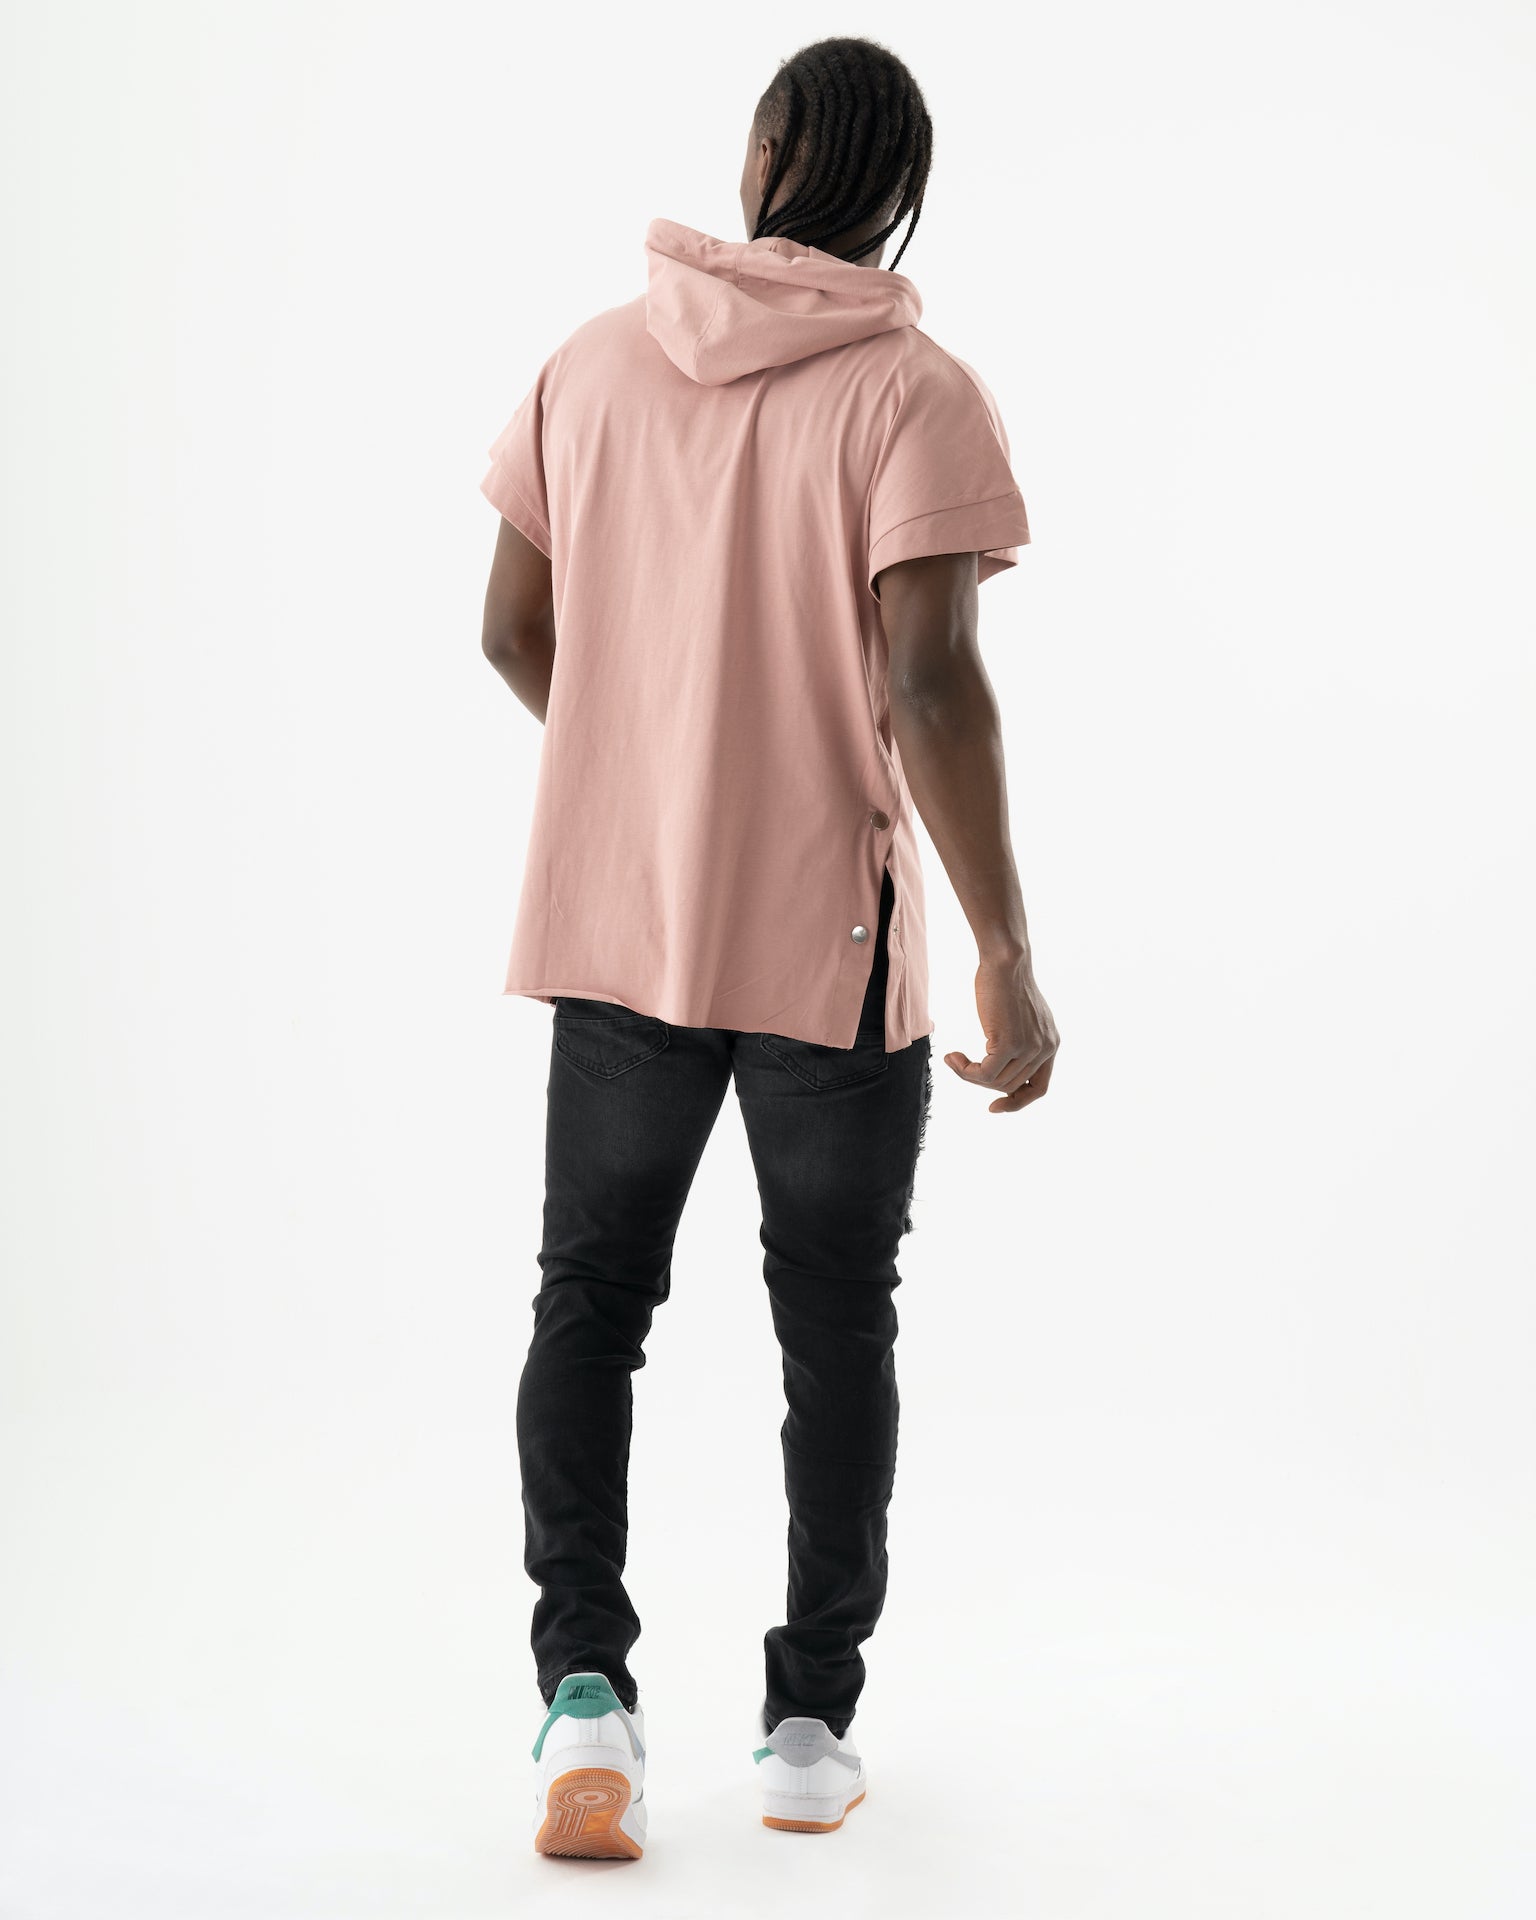 The back view of a man wearing the ONE SOUL pink hoodie.